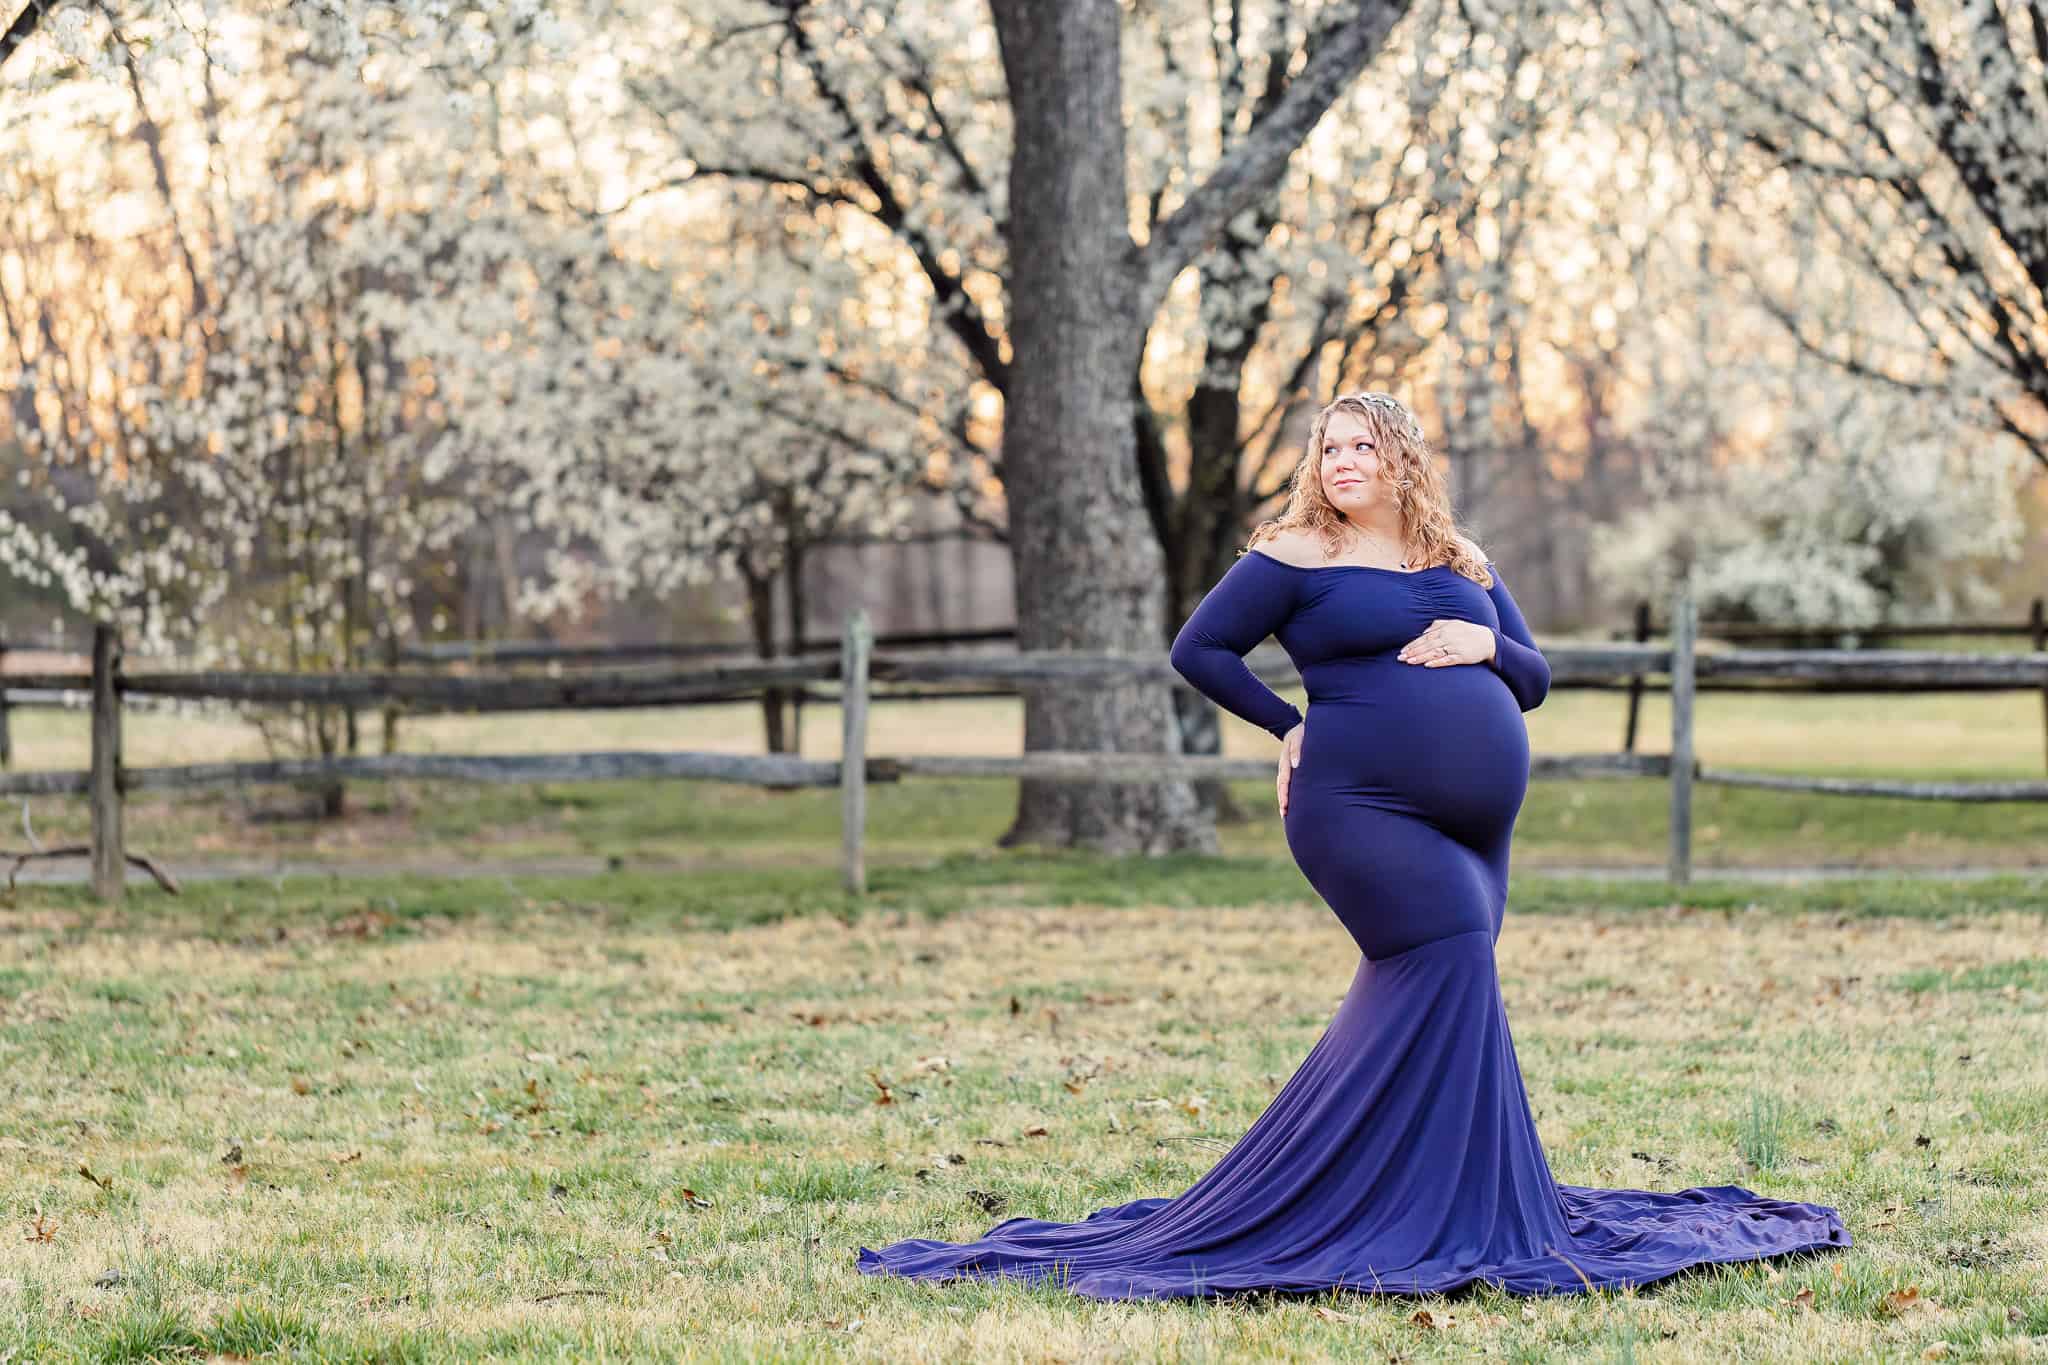 A blog about Premier Birth Center Chantilly featuring a photo of a mom-to-be in a blue gown posing in front of white blossoming trees.